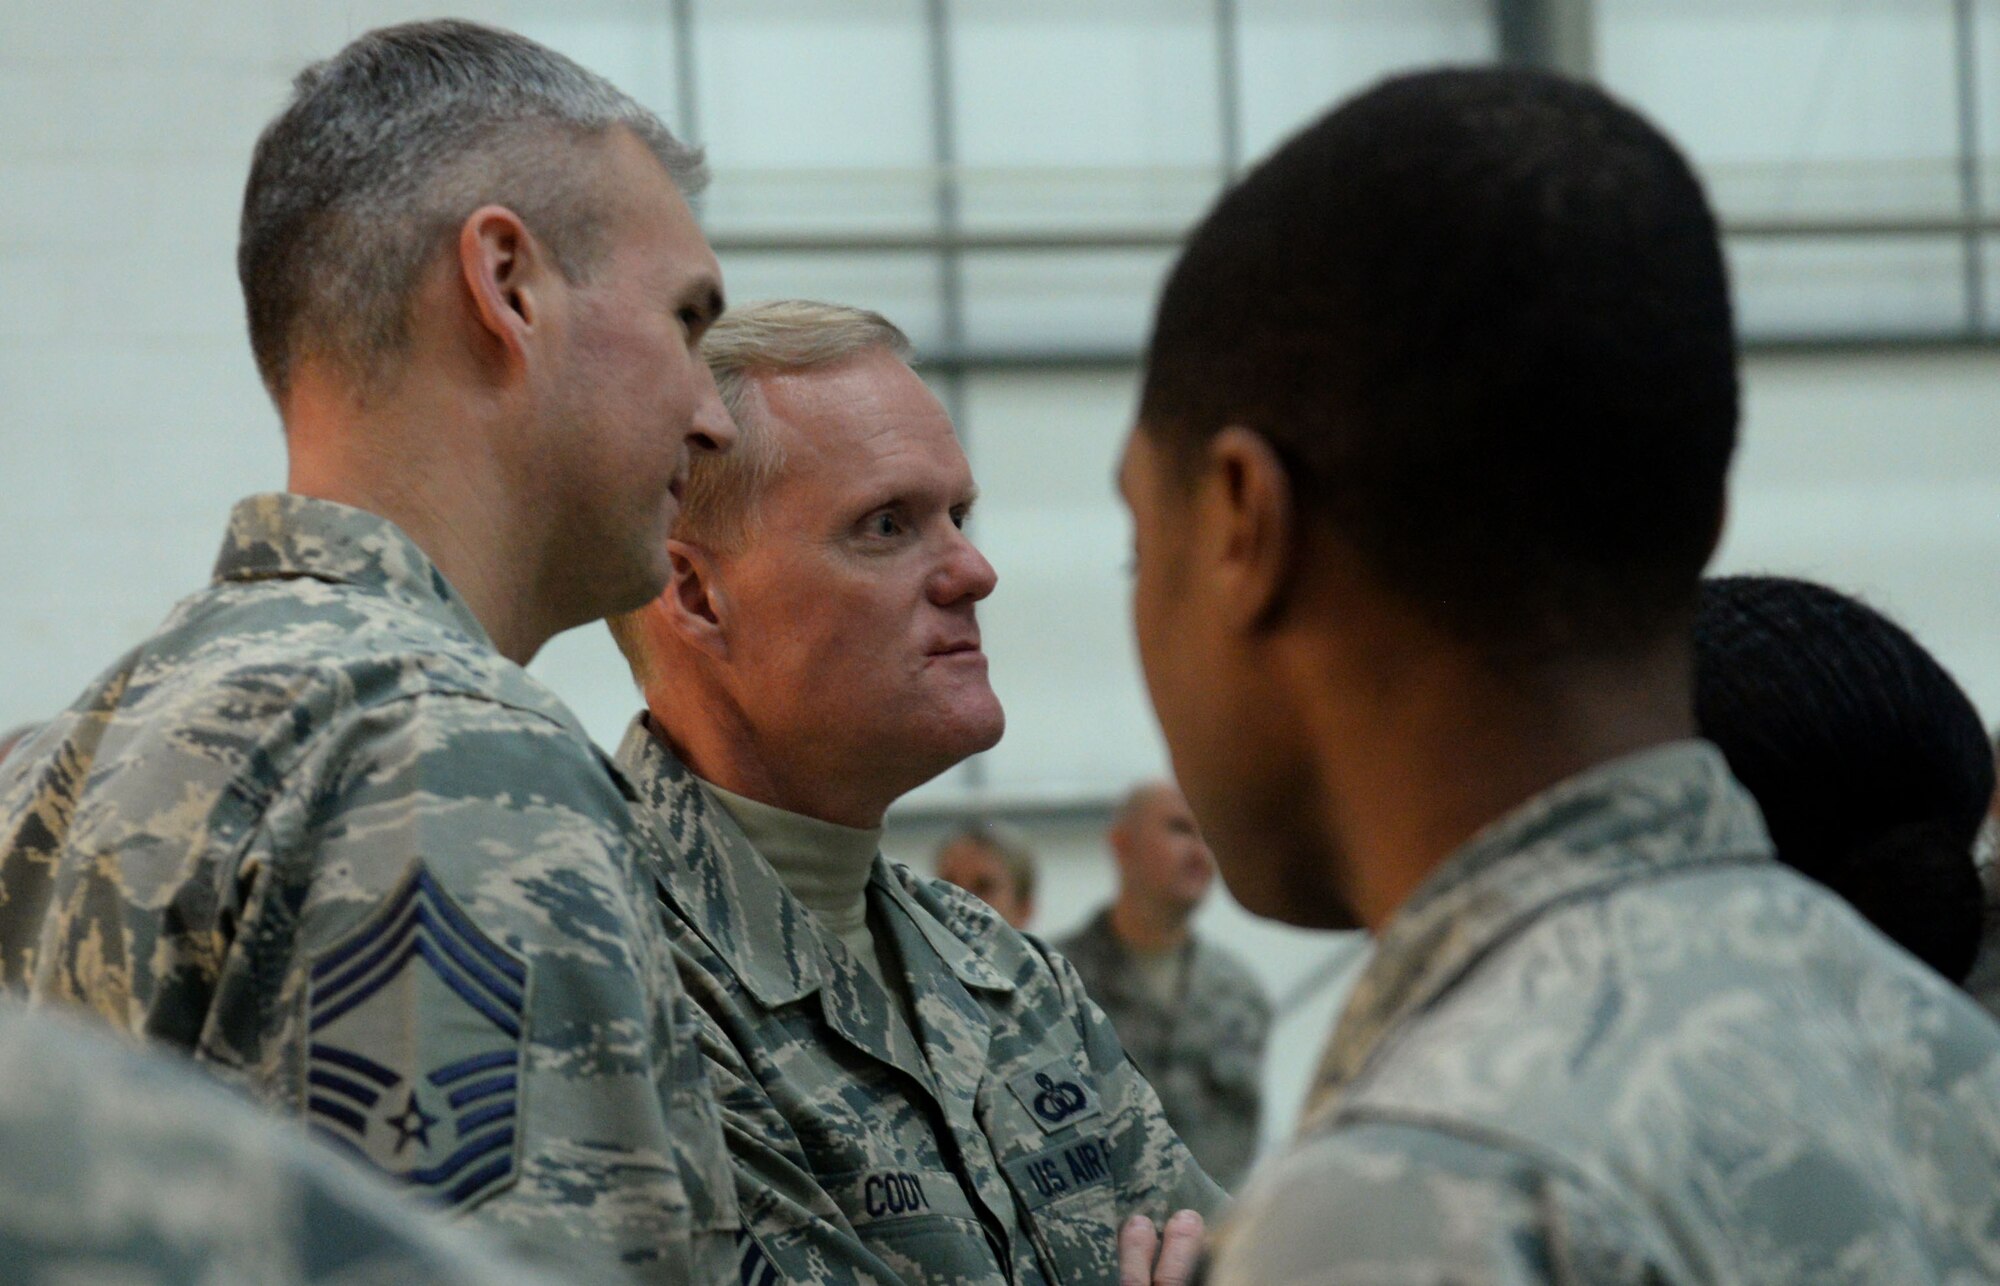 Chief Master Sgt. of the Air Force James Cody dedicates time to socialize with Airmen during his visit Jan. 27, 2016, on RAF Mildenhall, England. He visited various units to learn about the duties of Airmen around the base and express his gratitude for their hard work and dedication to the mission. (U.S. Air Force photo by Airman 1st Class Justine Rho/Released)